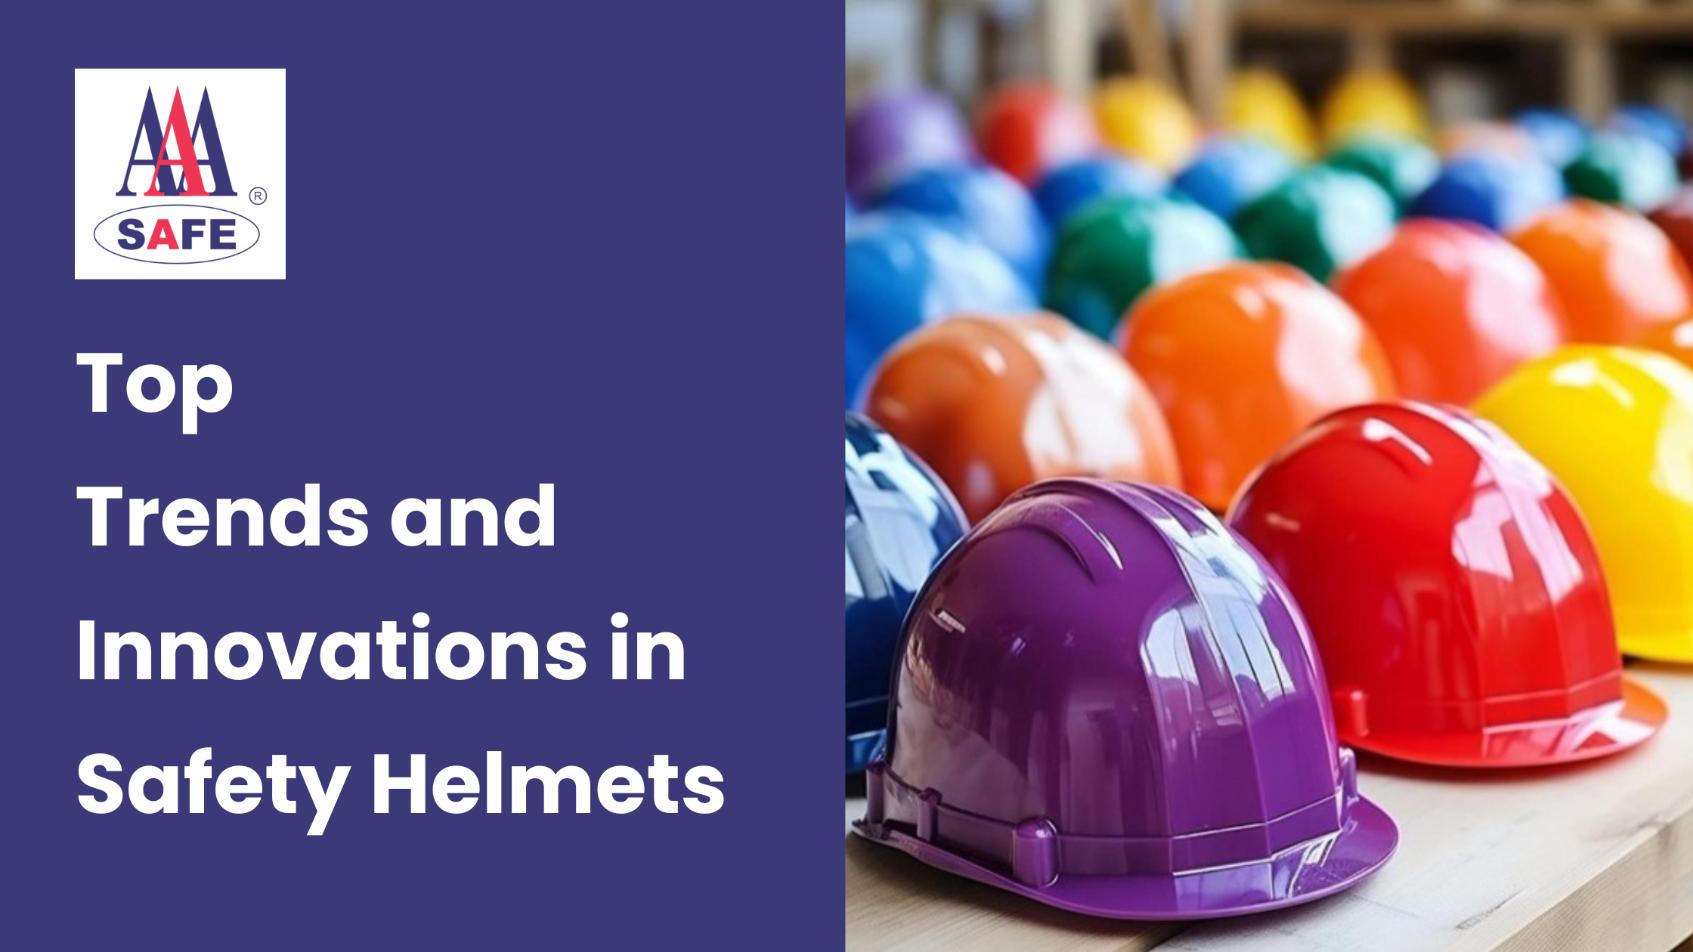 Top Trends and Innovations in Safety Helmets